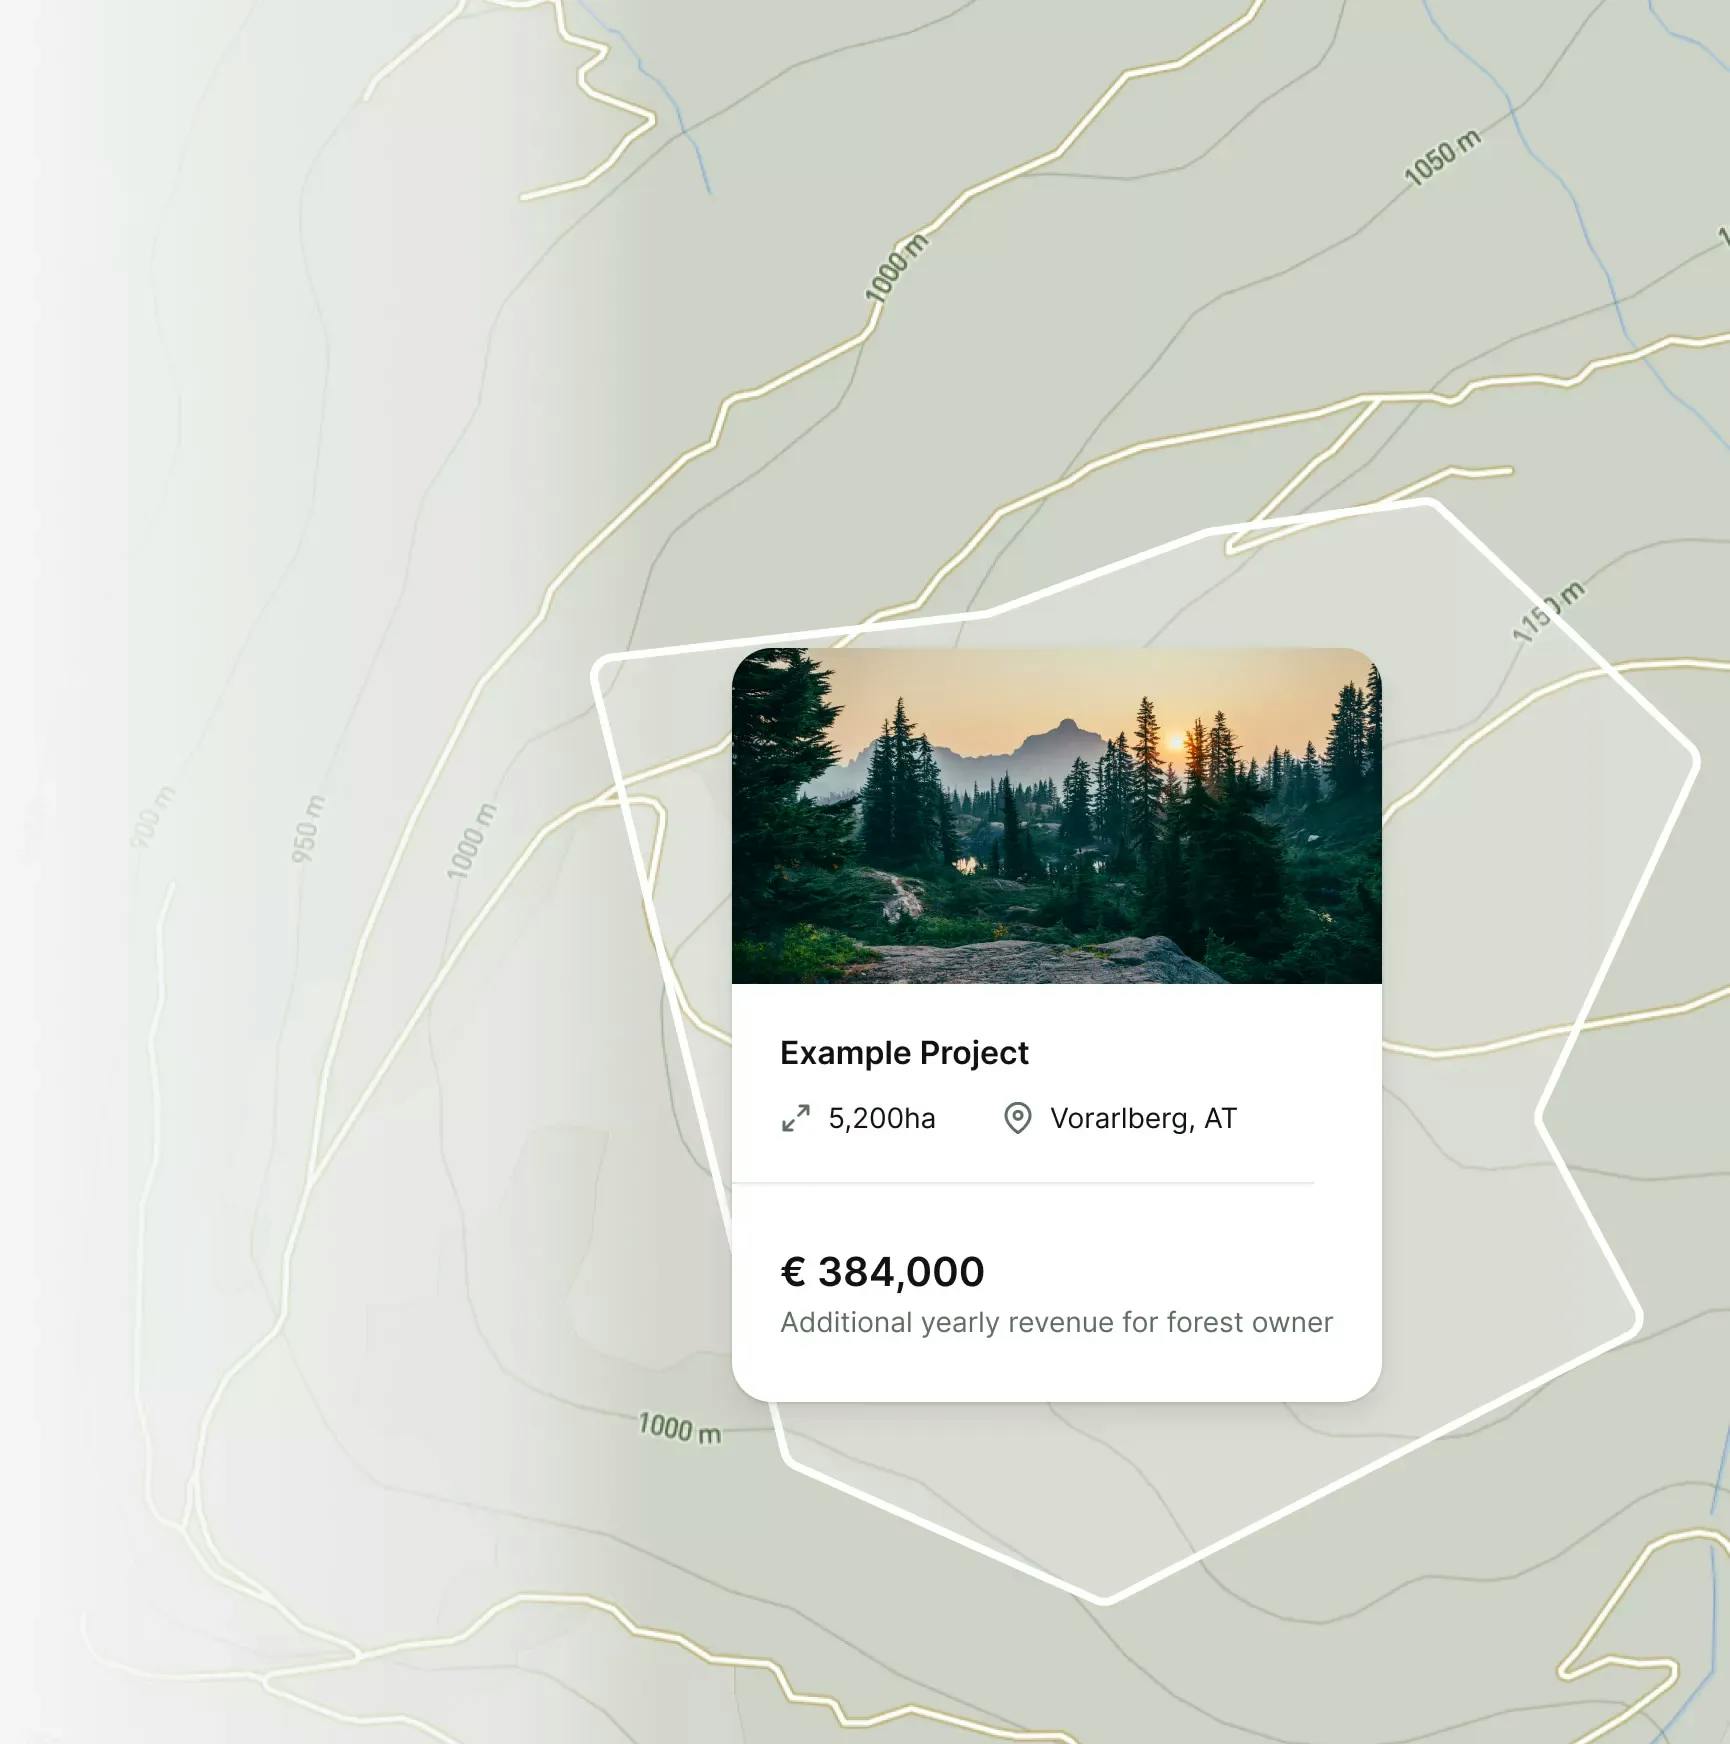 Map with an example project, which shows that an example project makes 390.000€ additional revenue per year